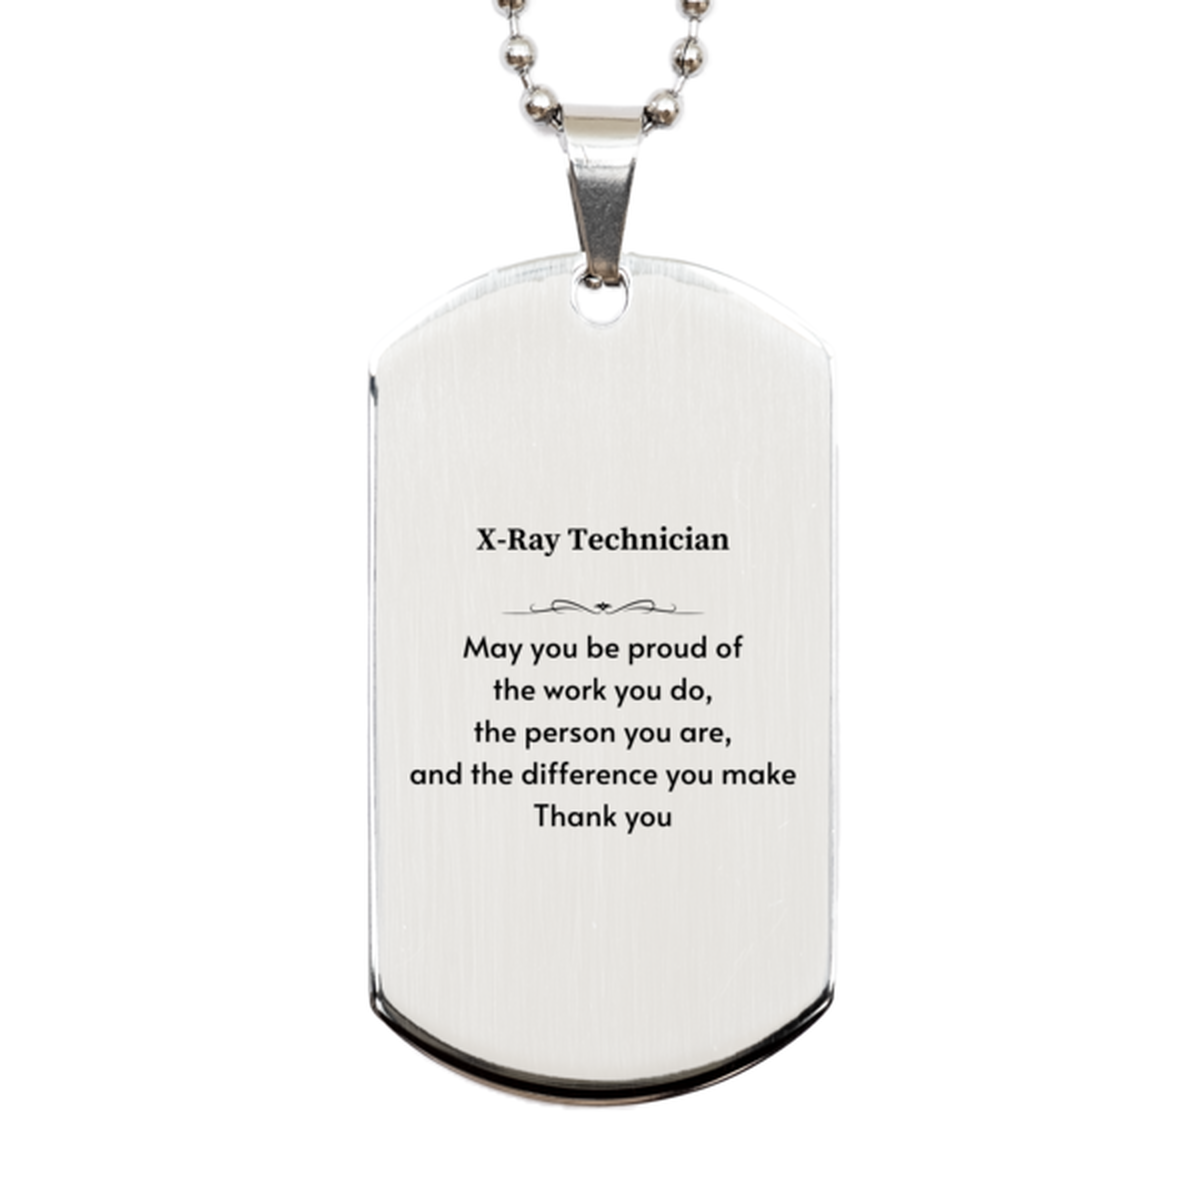 Heartwarming Silver Dog Tag Retirement Coworkers Gifts for X-Ray Technician, X-Ray Technician May You be proud of the work you do, the person you are Gifts for Boss Men Women Friends